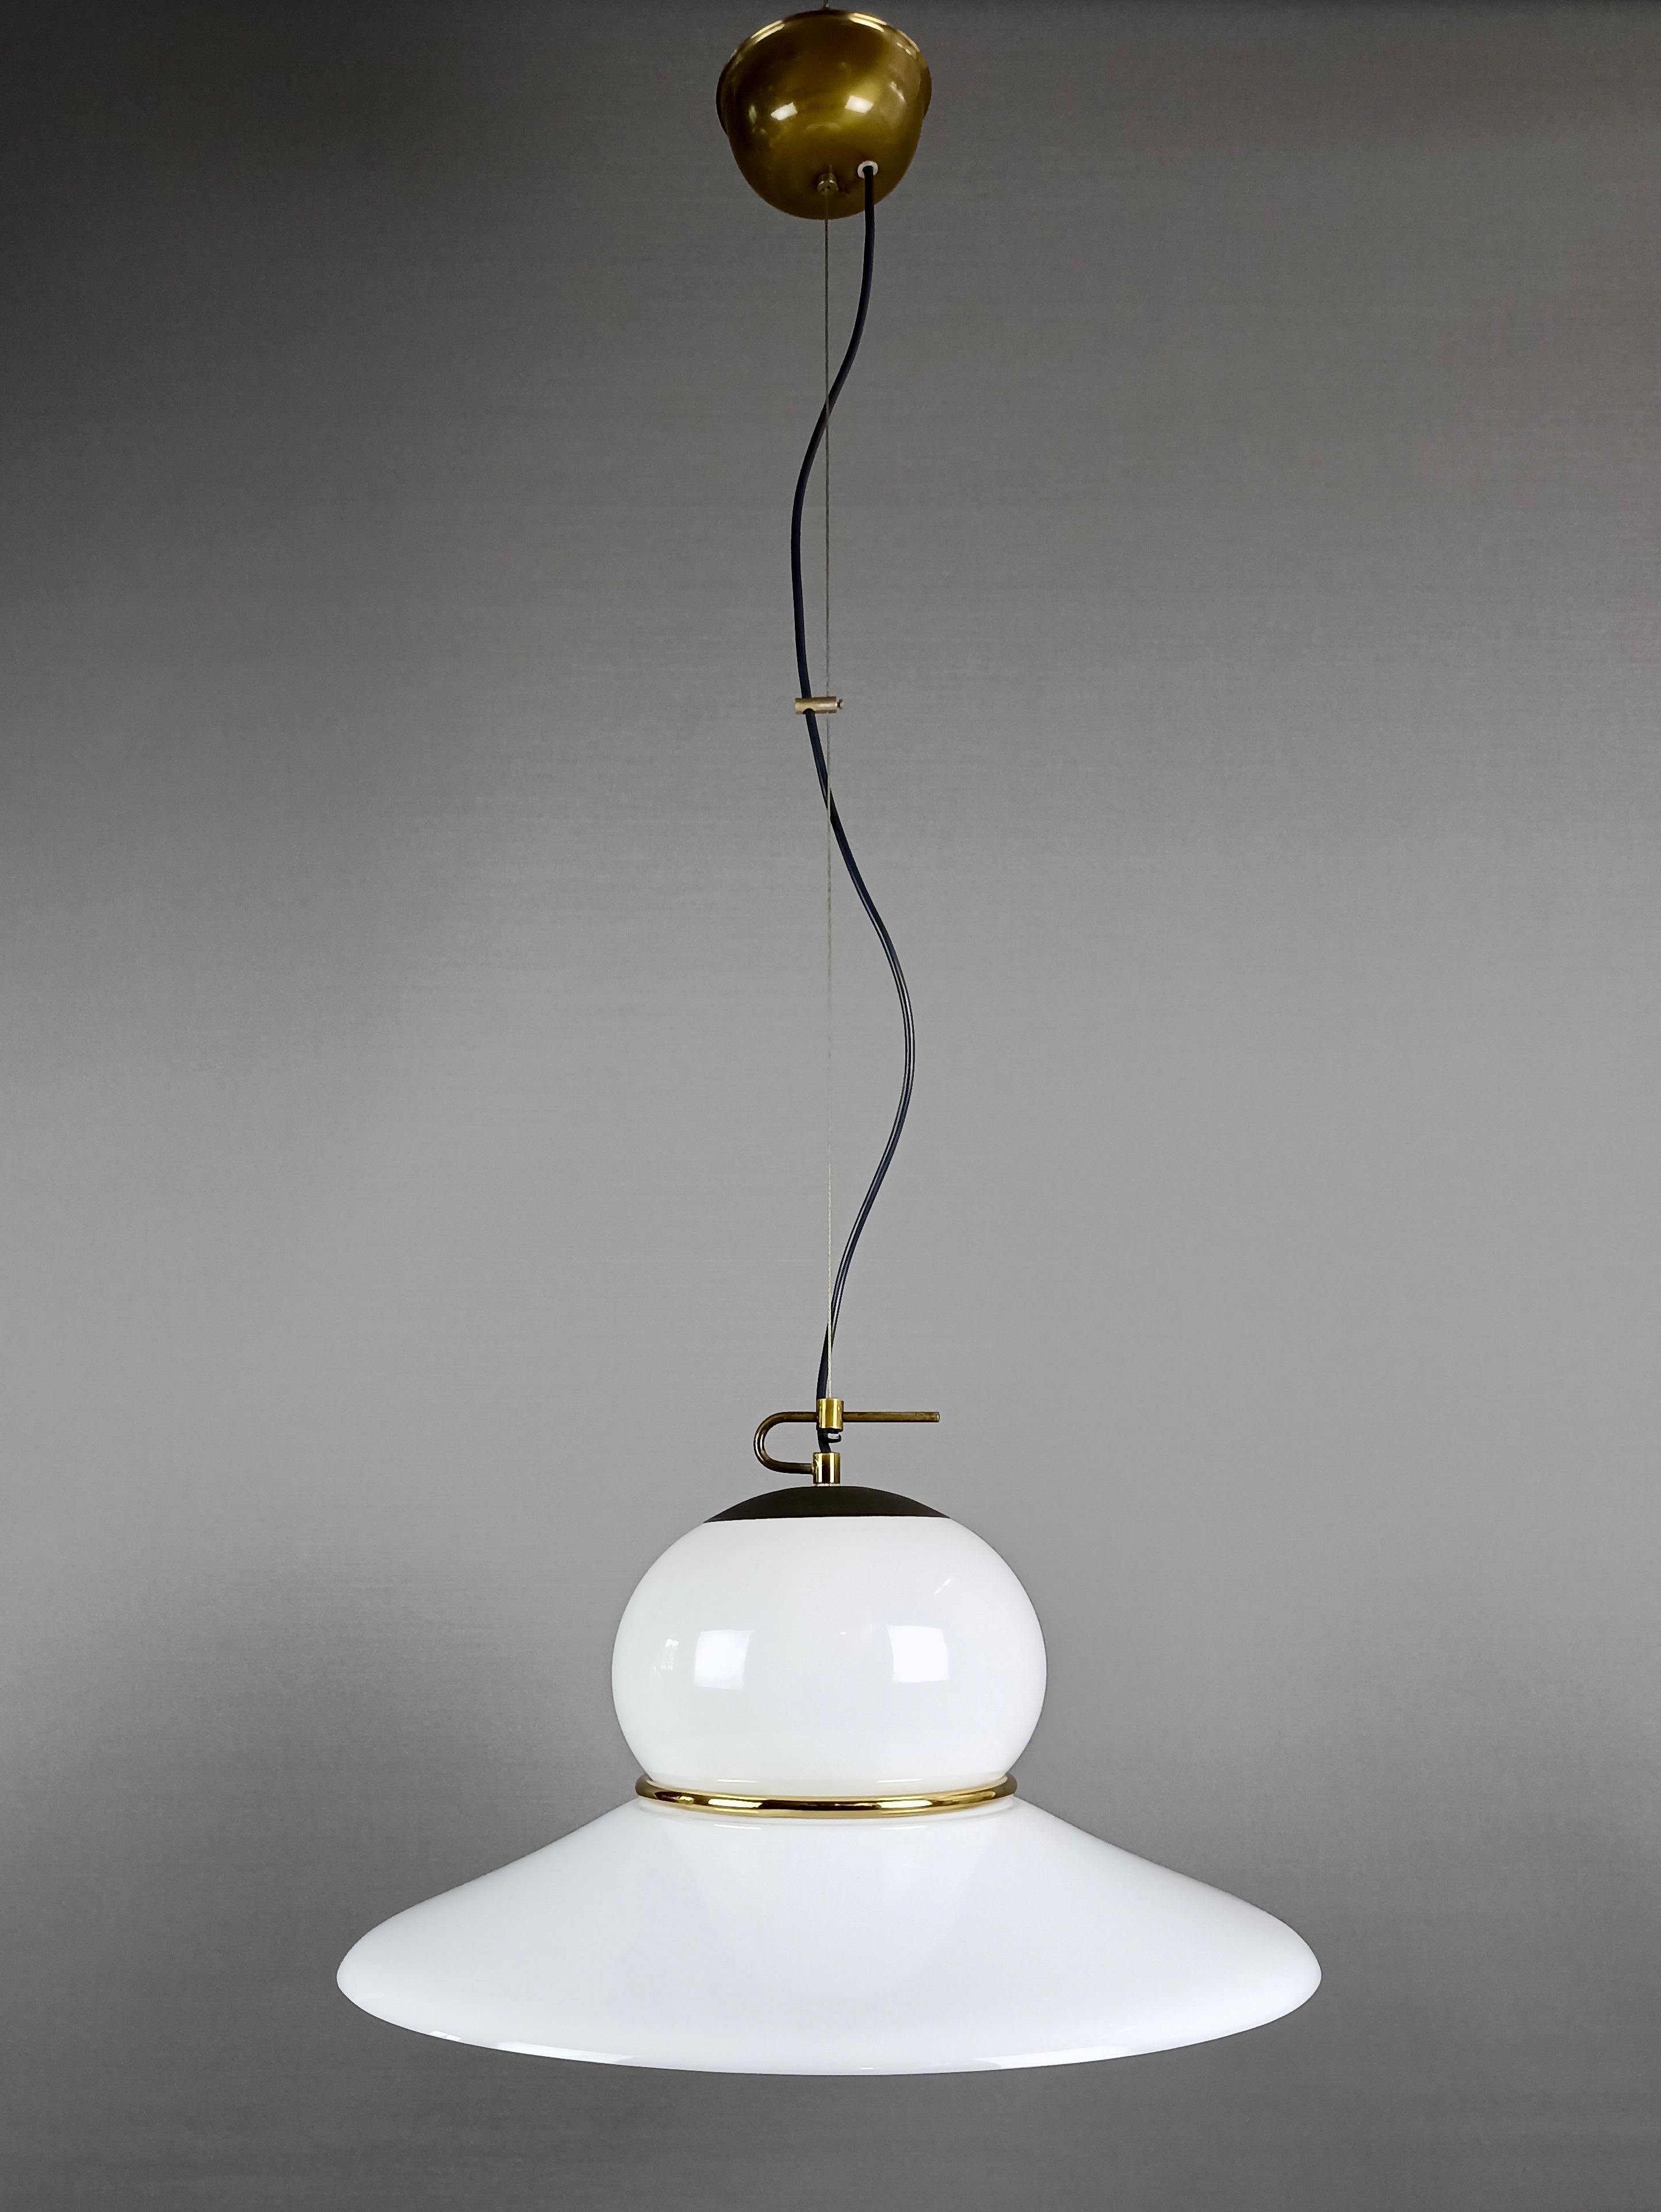 Italian 1970s pendant lamp with white plastic lampshade, burnished brass structure and steel cable fixing to the ceiling.
With its unusual shape it is a beautiful piece of furniture both when turned off and when on. 
The lampshade is made of